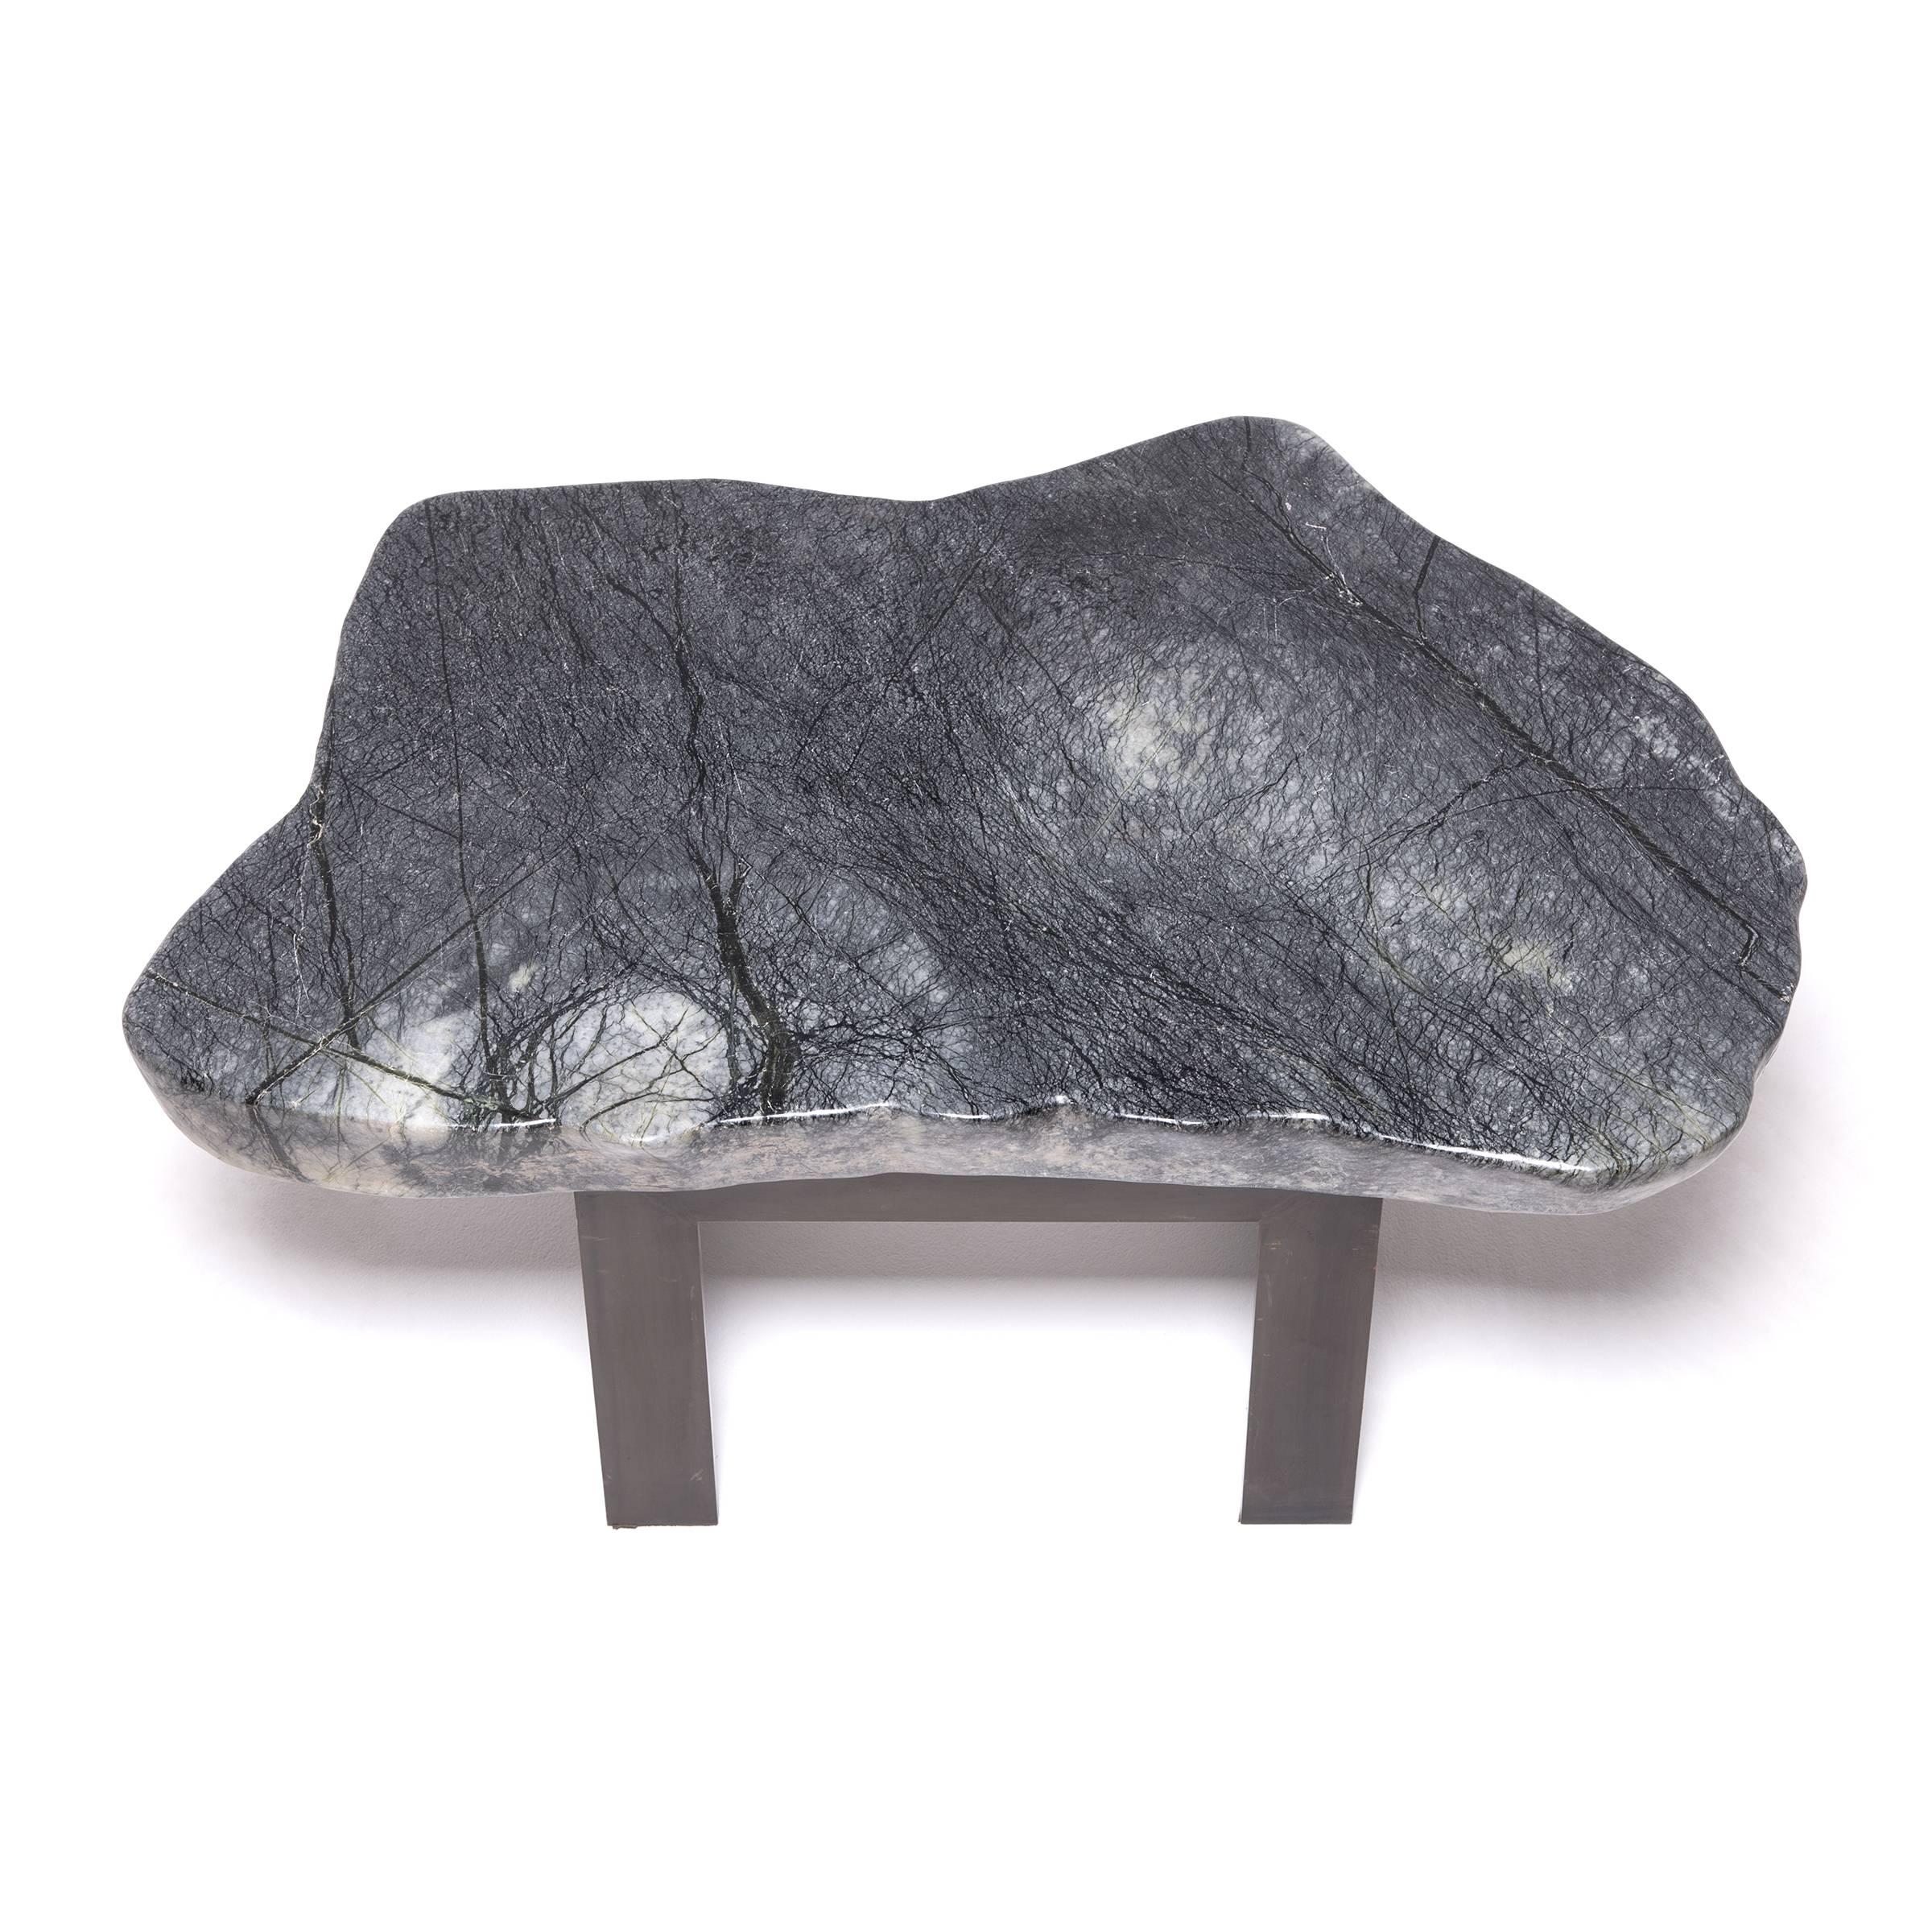 Chinese Meditation Stone Top Table 1